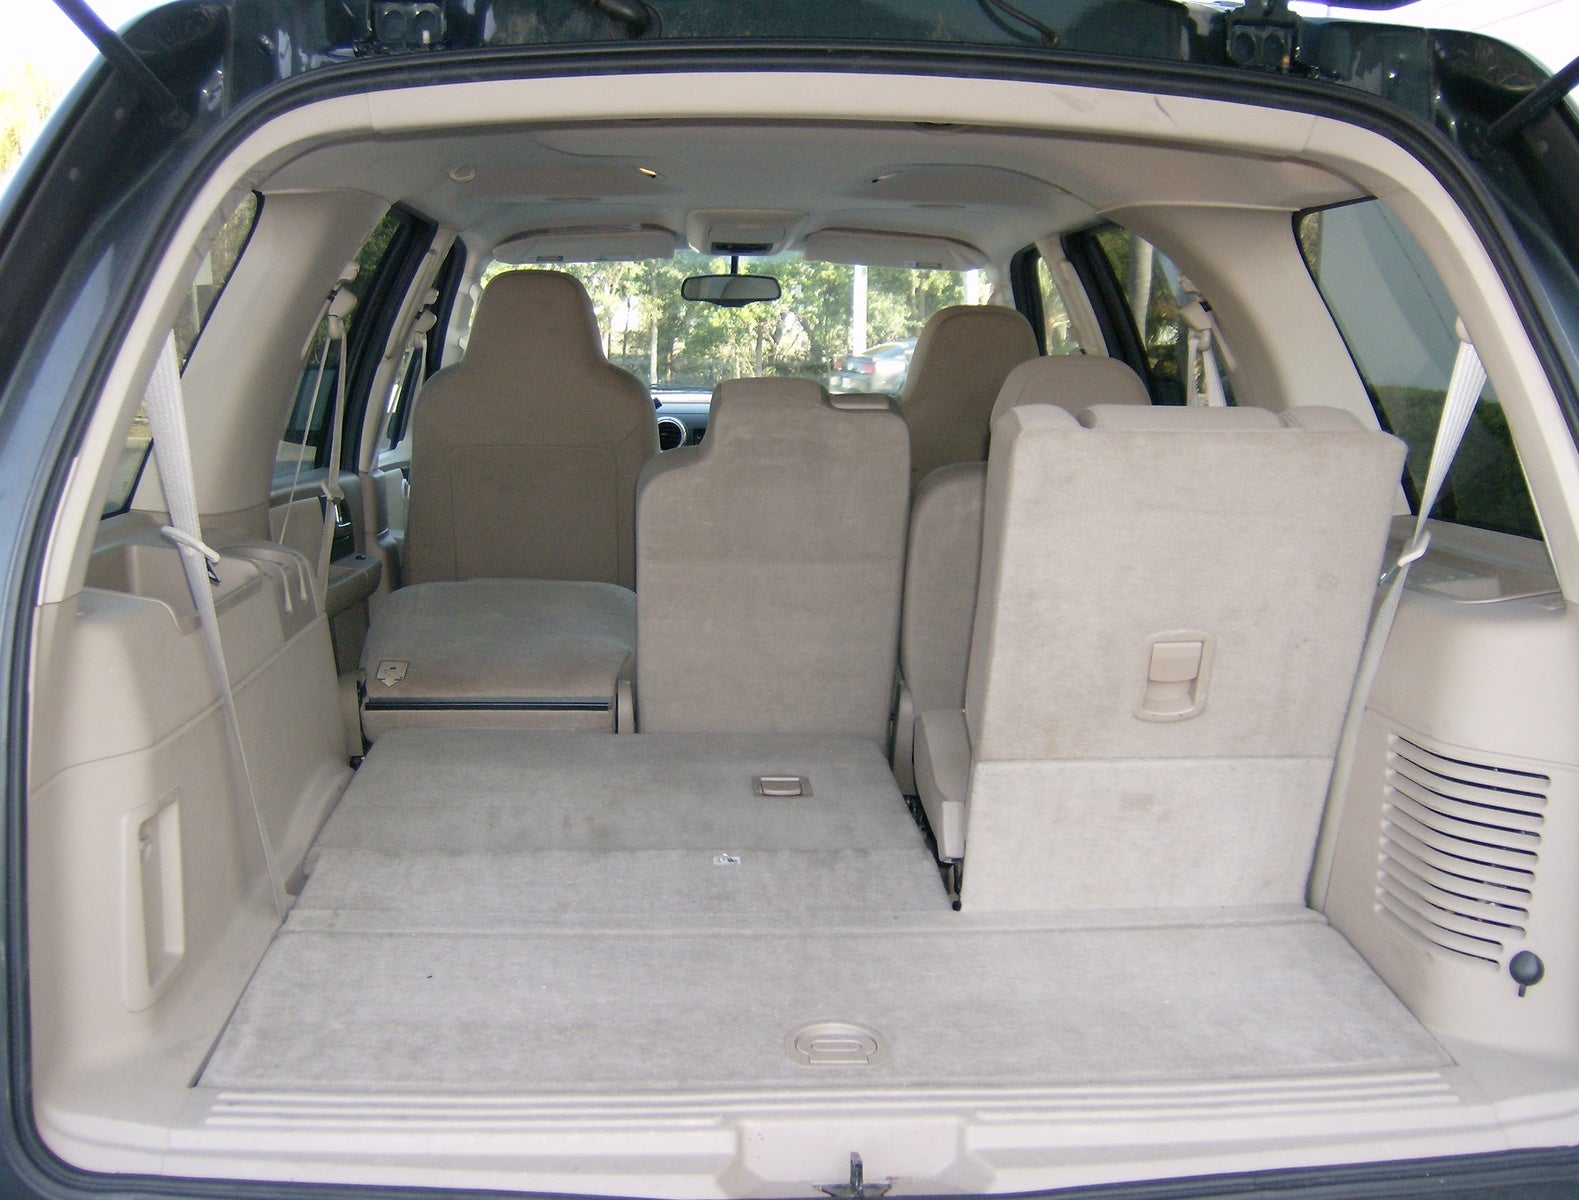 Ford expedition dimensions interior